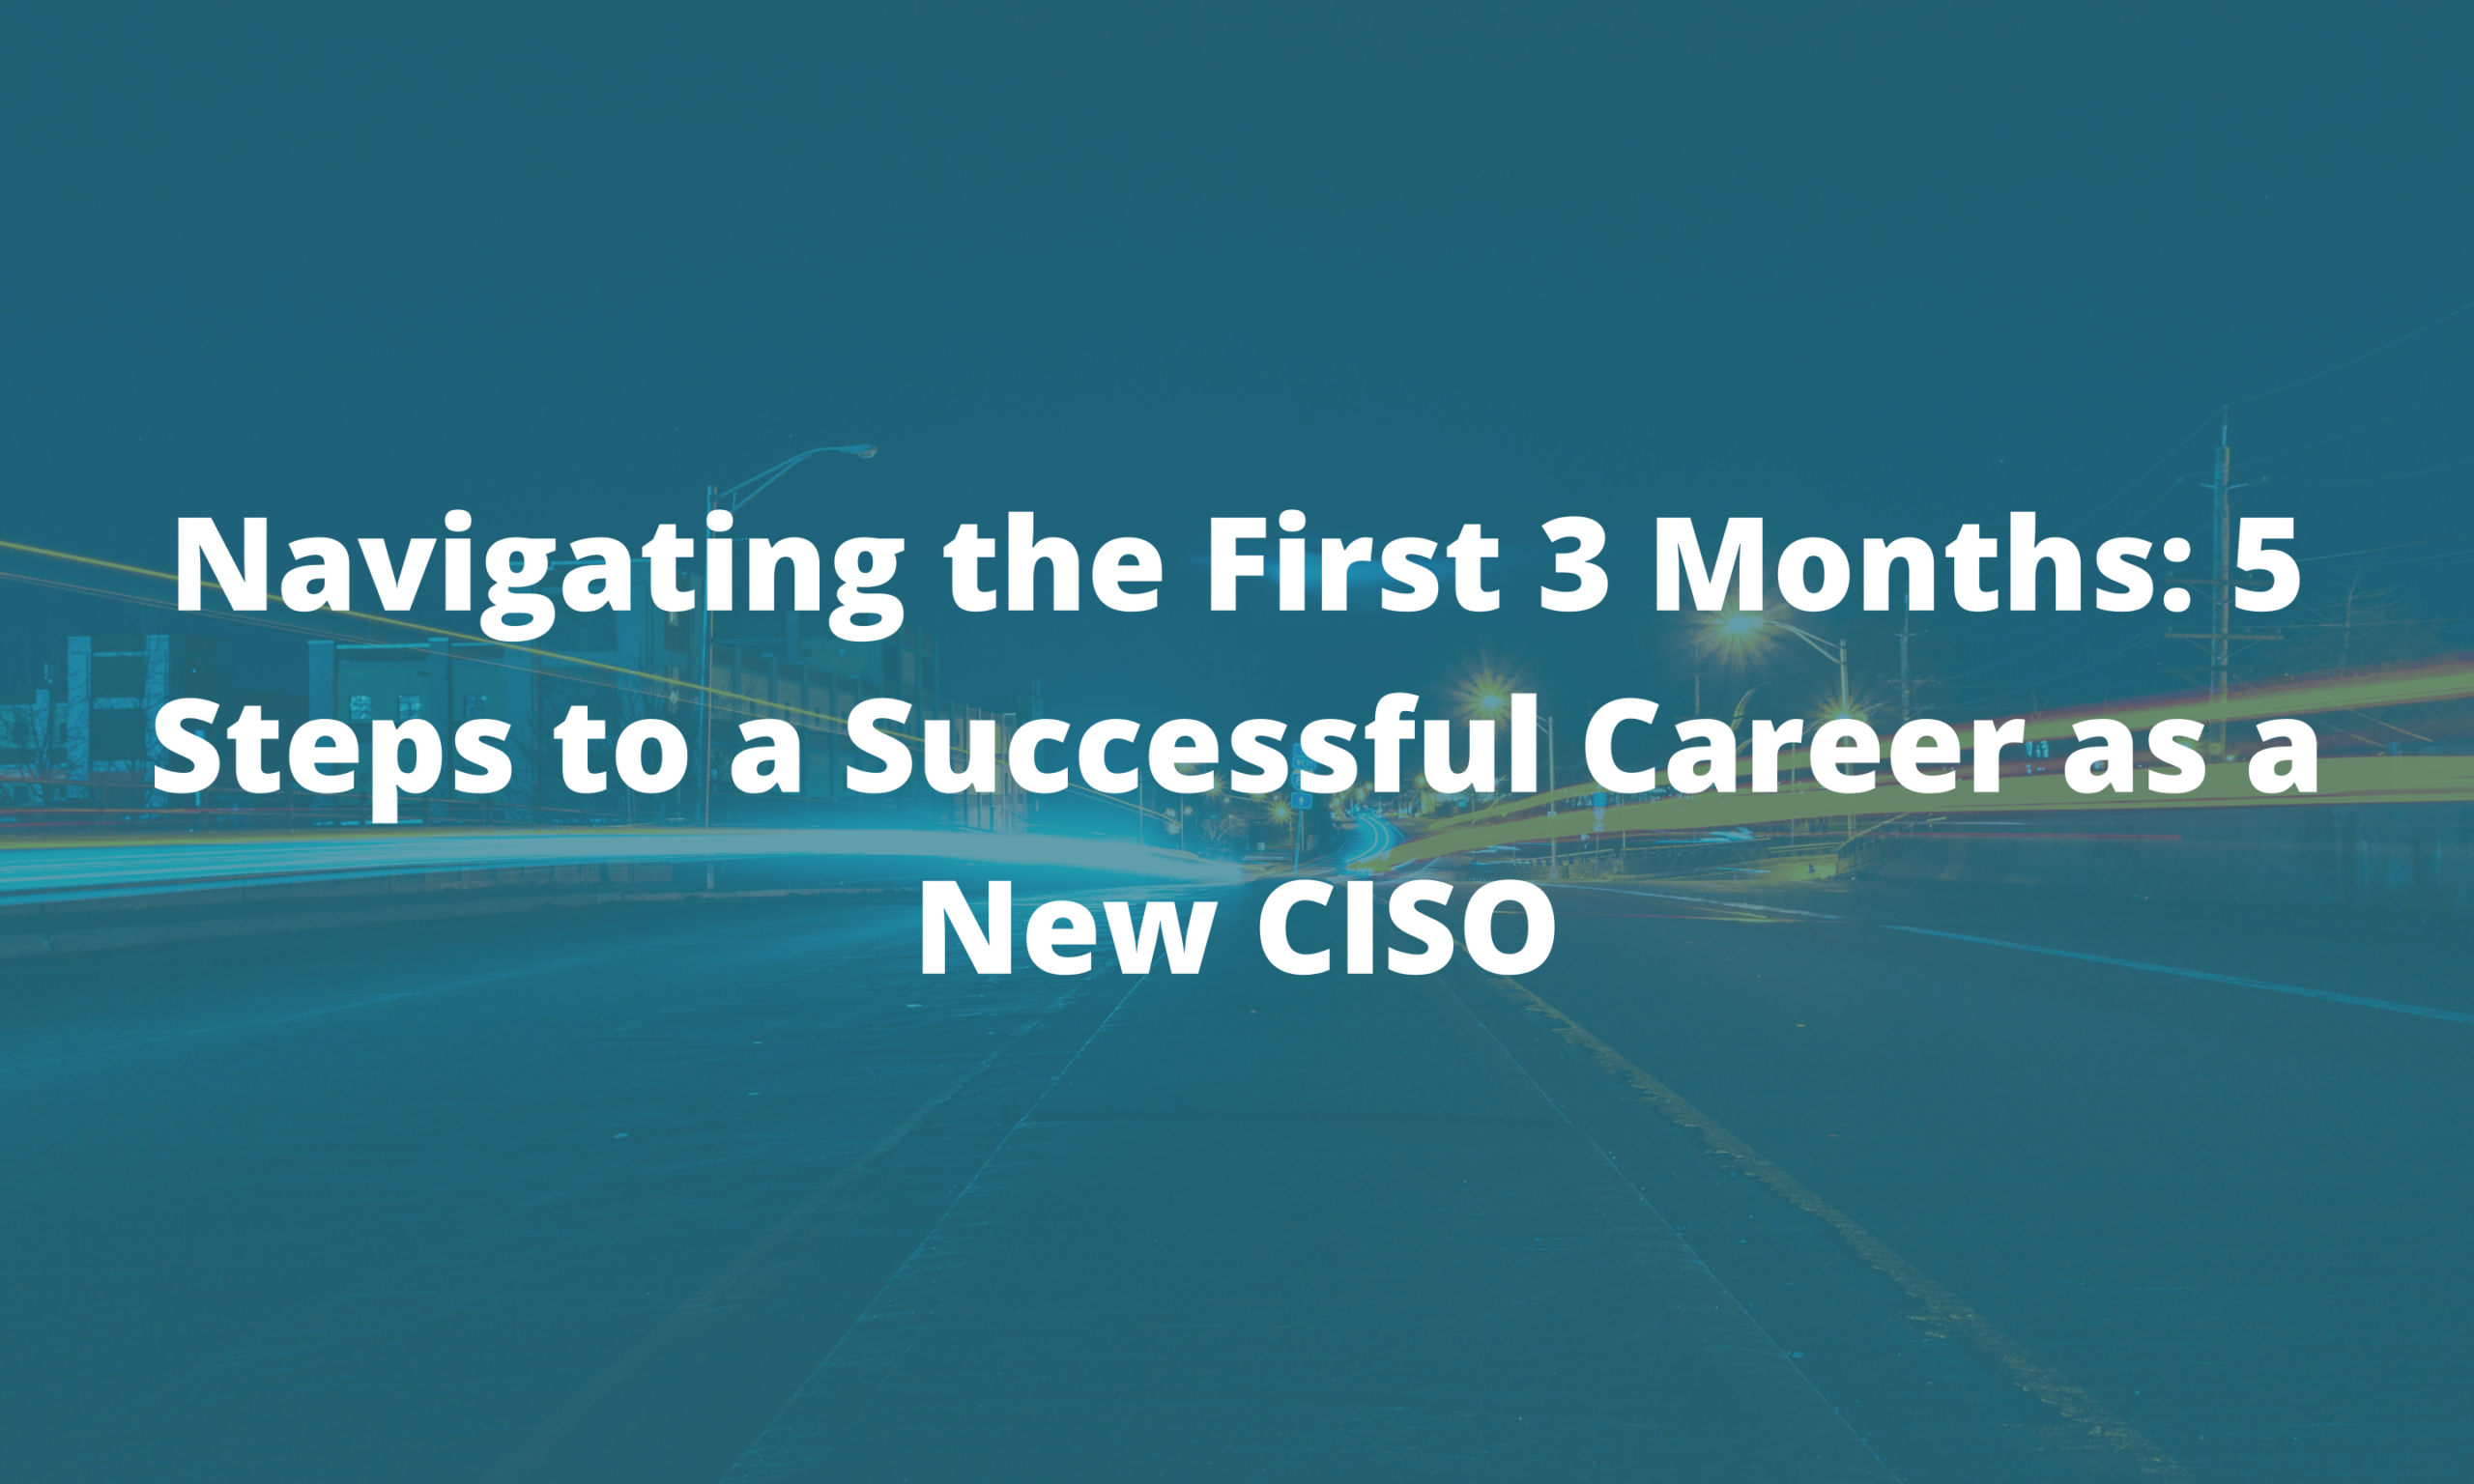 Navigating the First 3 Months: 5 Steps to a Successful Career as a New CISO